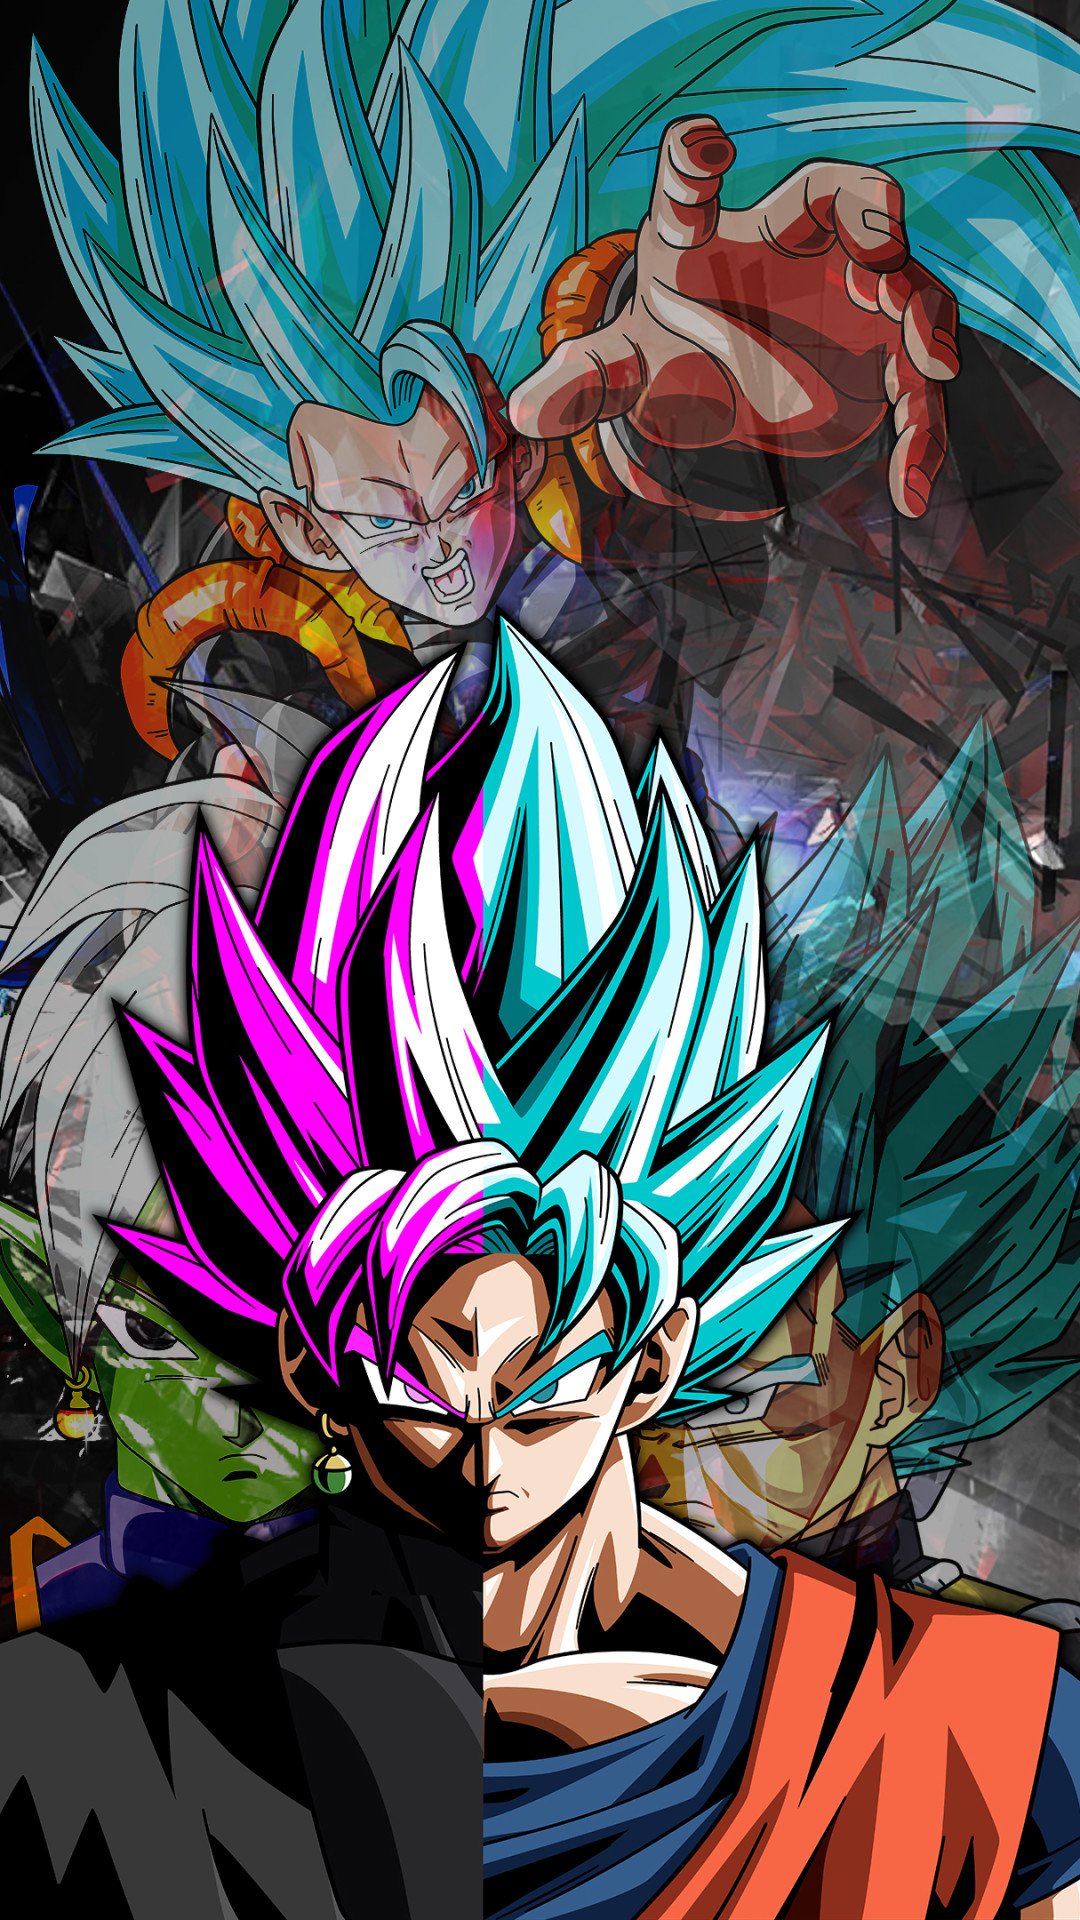 GokuVegeta Battle Live Wallpaper ProvideHD iPhoneAndroid images  free  download